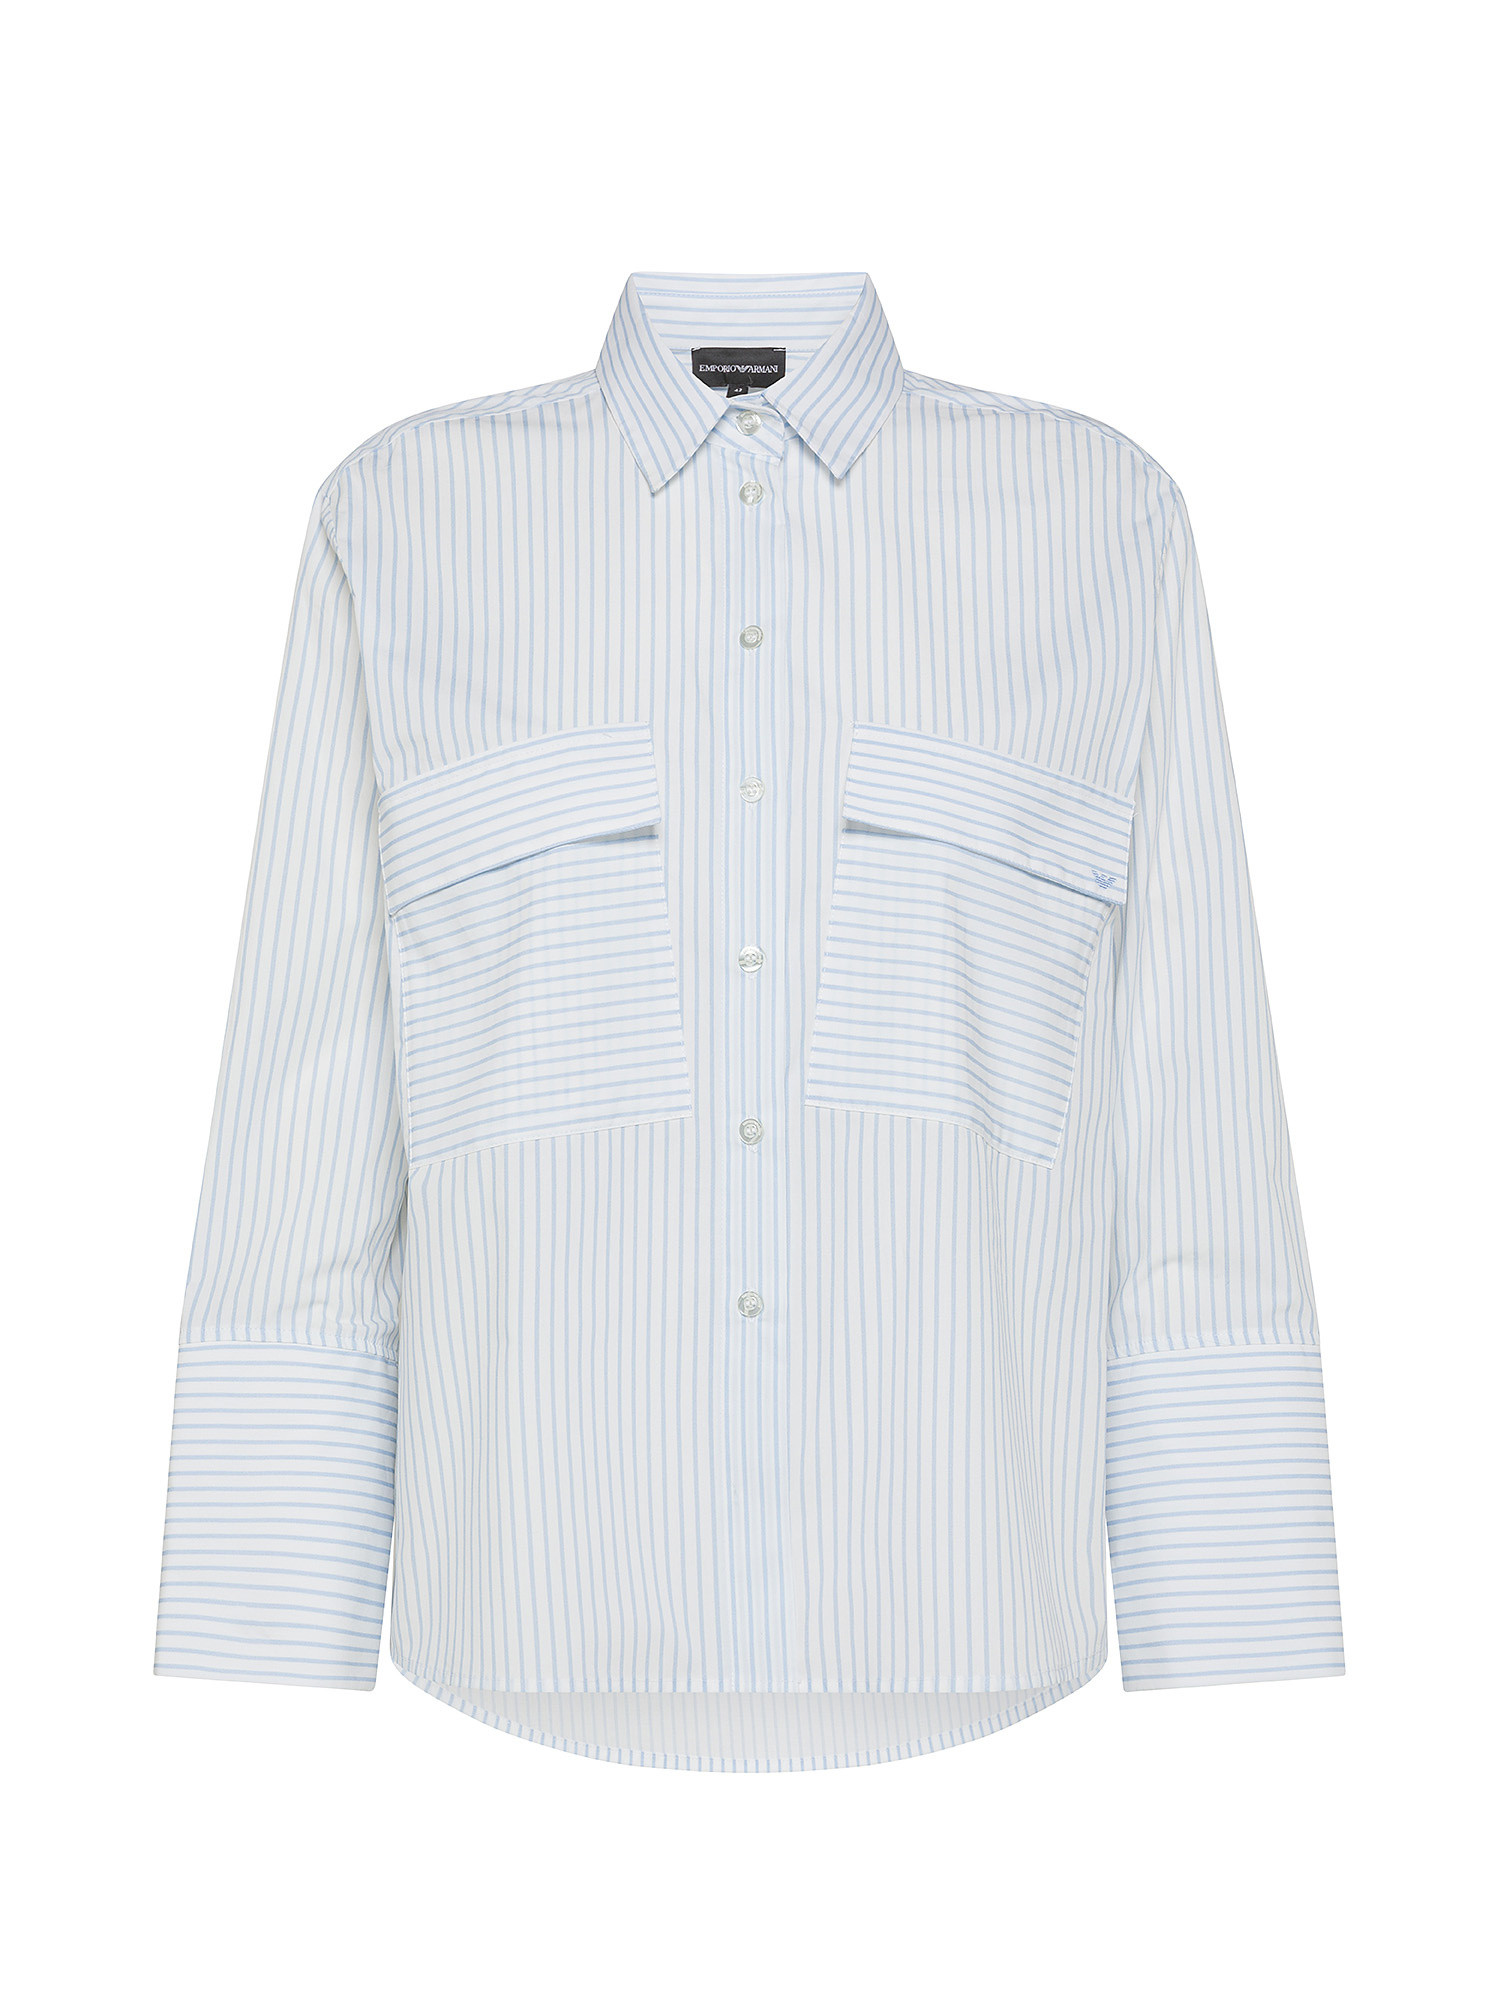 Emporio Armani - Striped shirt in cotton, White, large image number 0